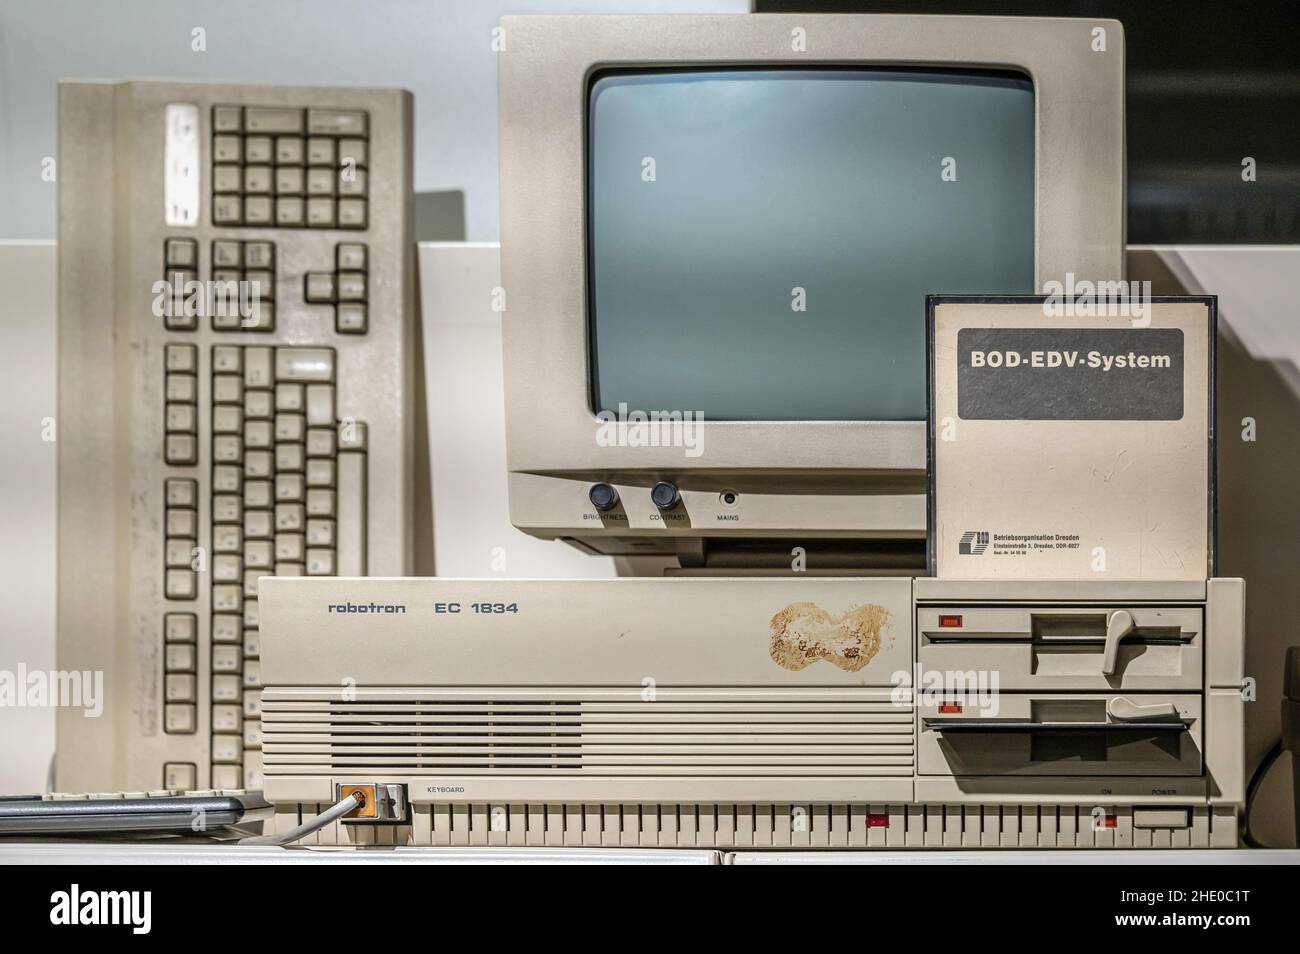 Retro Robotron EC 1834 computer on display at the DDR Museum of Dresden, Saxony, Germany Stock Photo